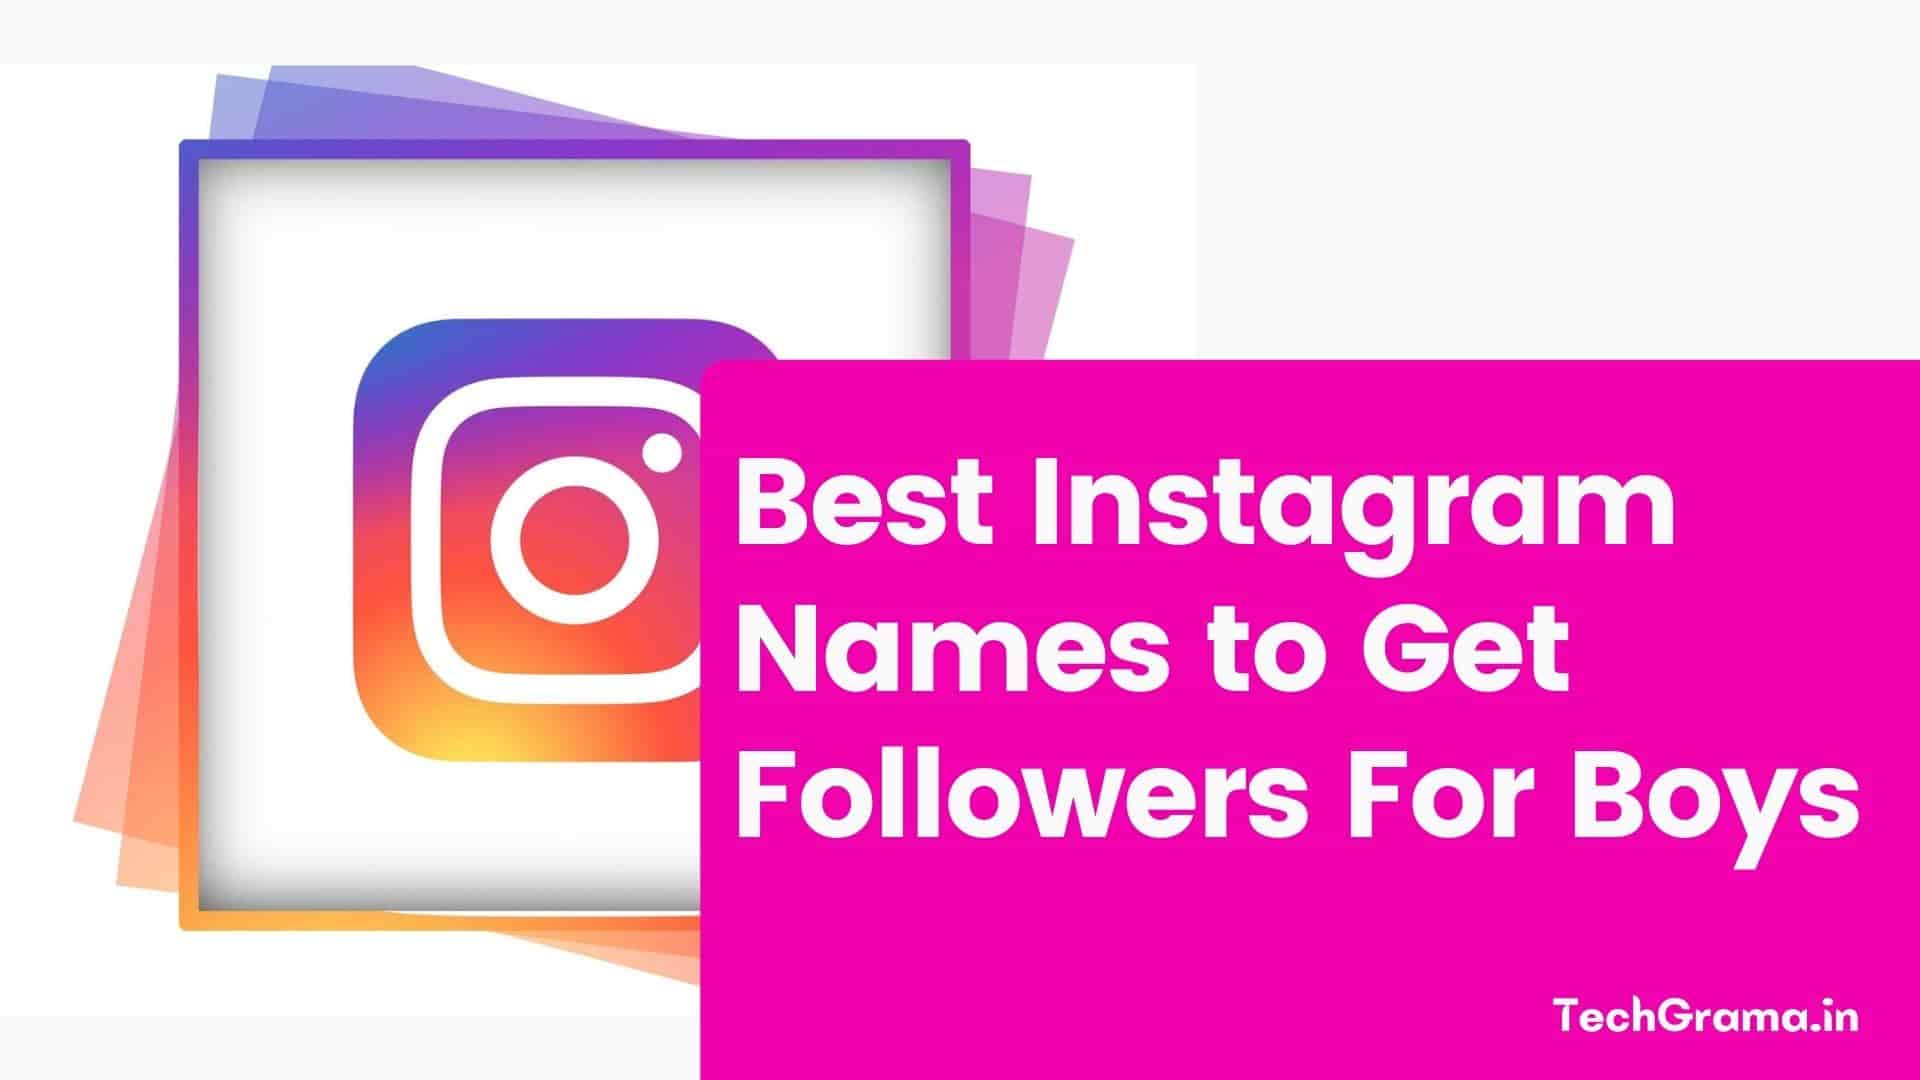 Best instagram names to get followers for boys, Best Instagram Names to Get Followers, Best Instagram Names to Get Followers For Boys, Best Instagram Names to Get Followers For Girls, Best Instagram Names to Get Followers Indian, Best Instagram Usernames to Get Followers, Best Names For Instagram to Get Followers, Best Instagram Usernames to Get Followers For Girl, Best Instagram Names to Get Followers India, Best Instagram Names to Get Followers in Hindi, Best Instagram Names to Get Followers For Girl & Boy Indian.